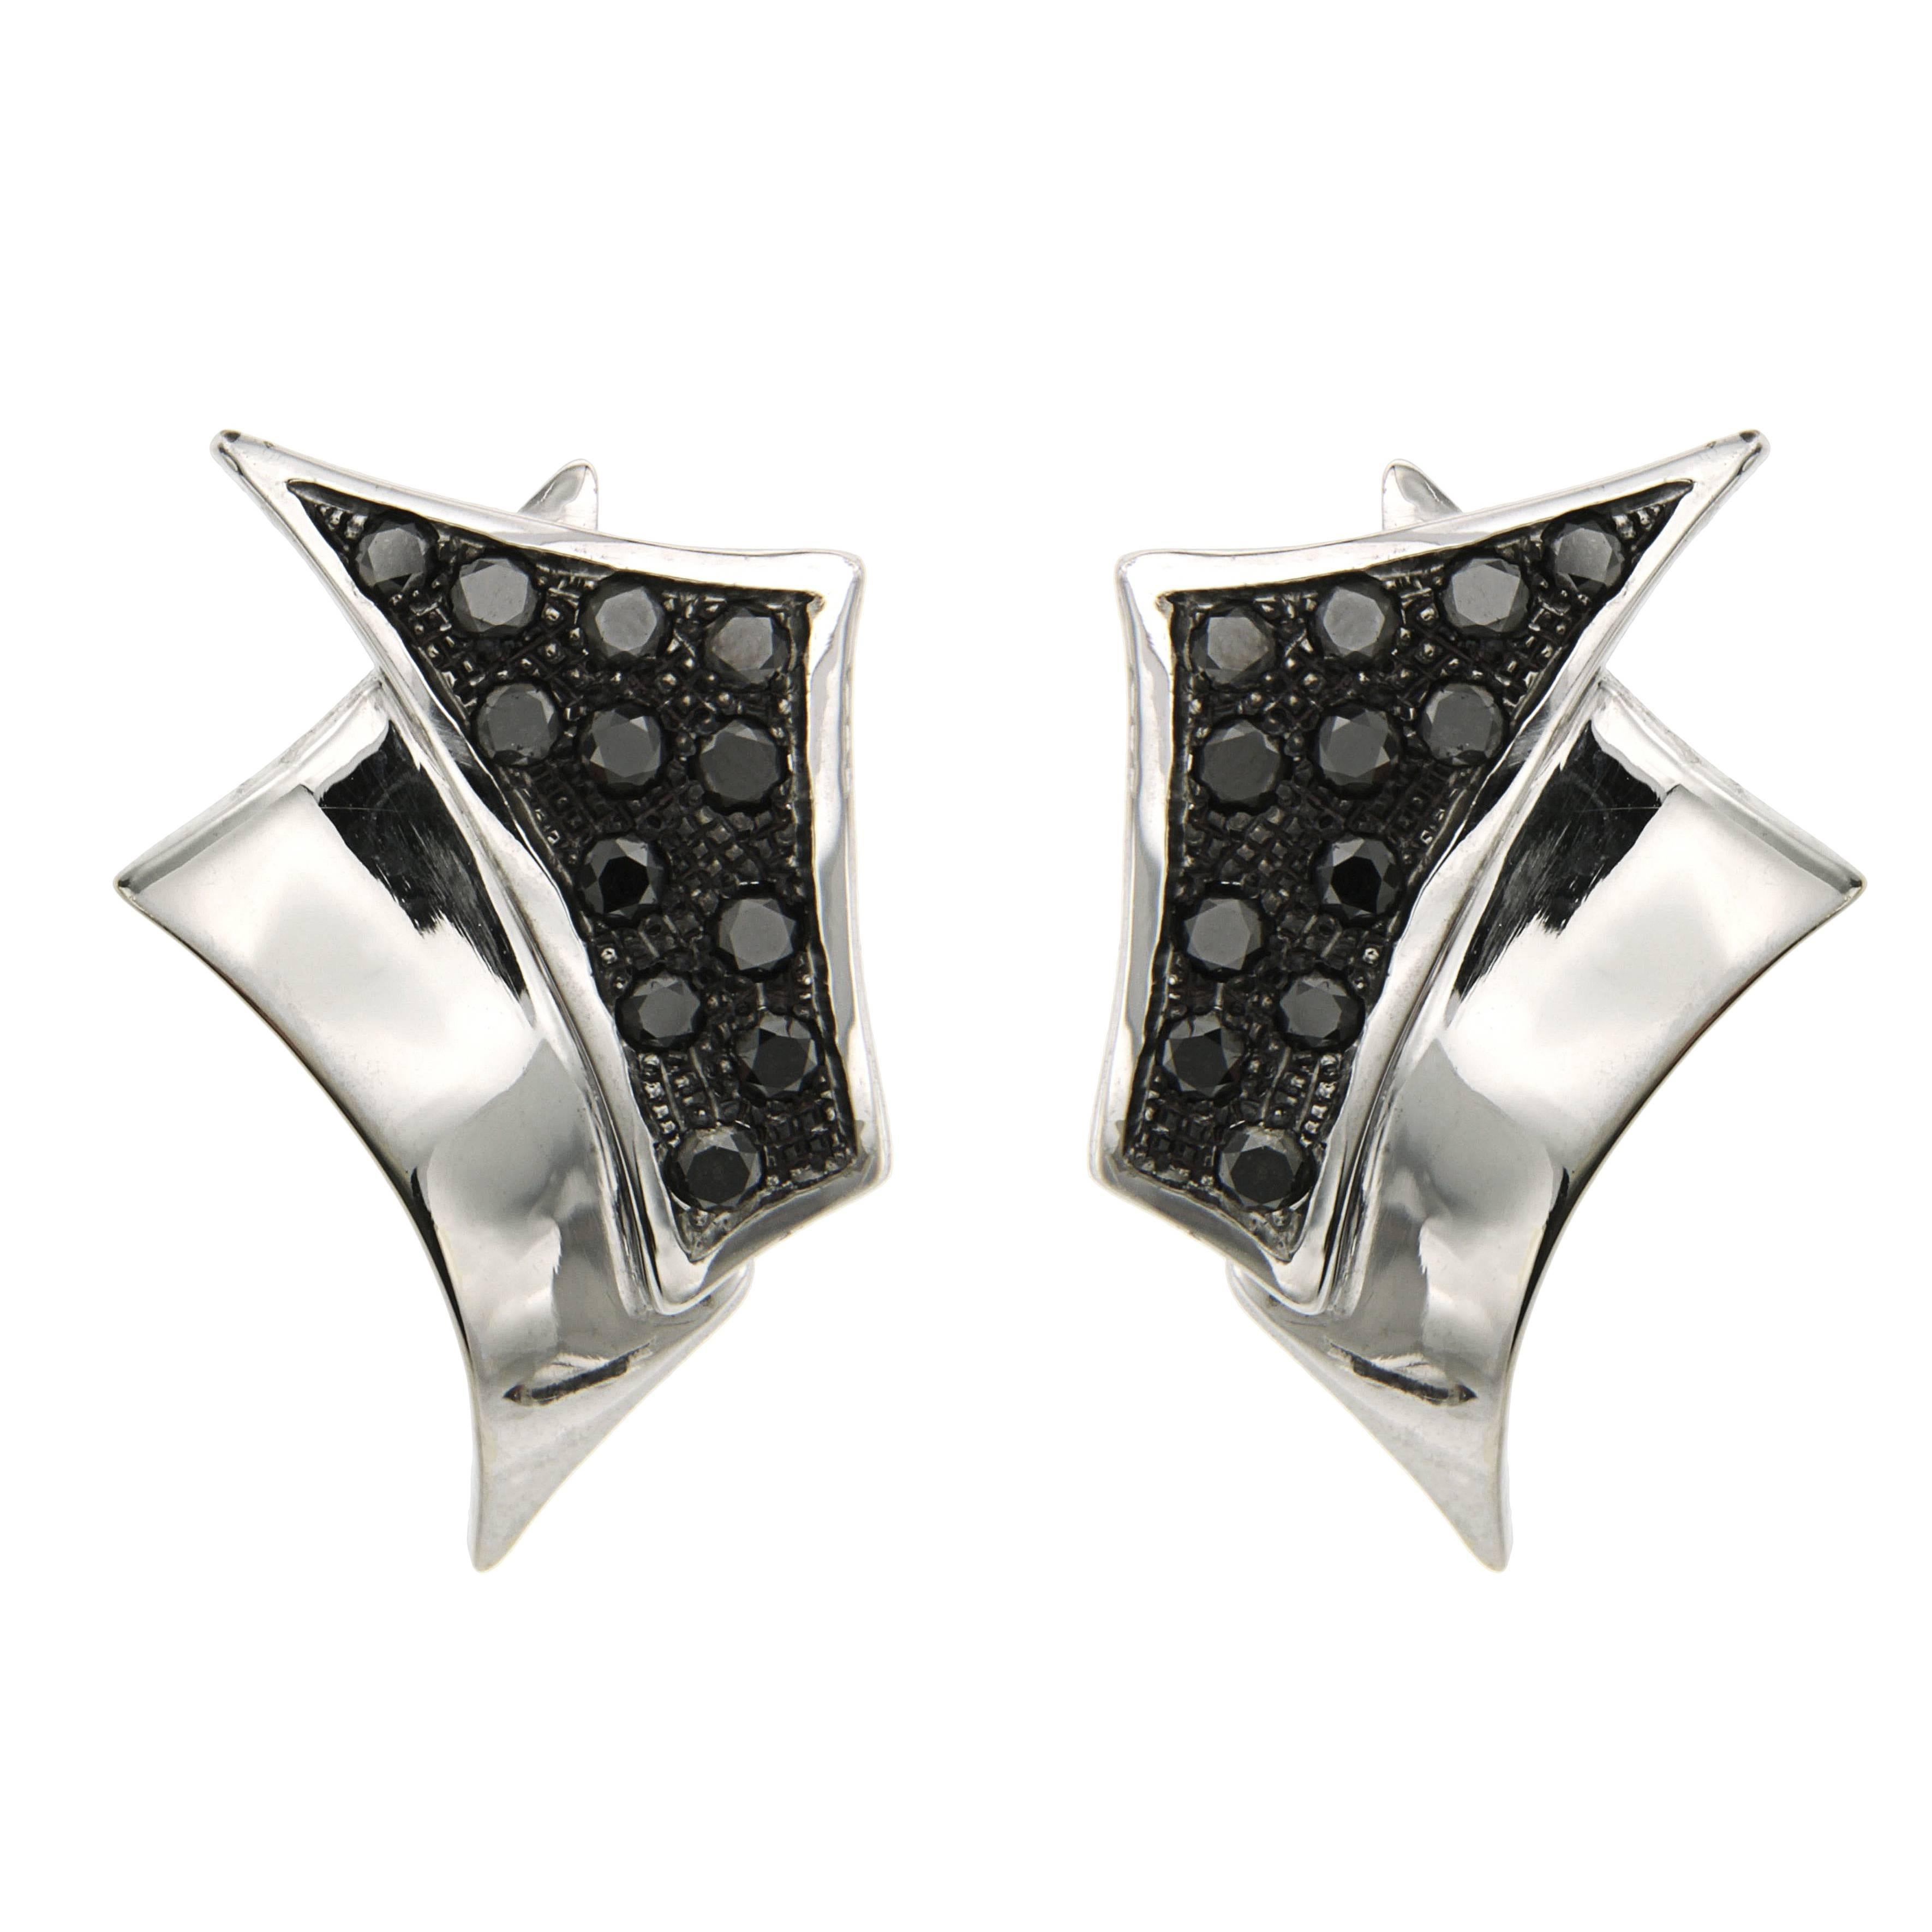 Black Diamonds 18k White Gold Earrings Handcrafted in Italy by Botta Gioielli